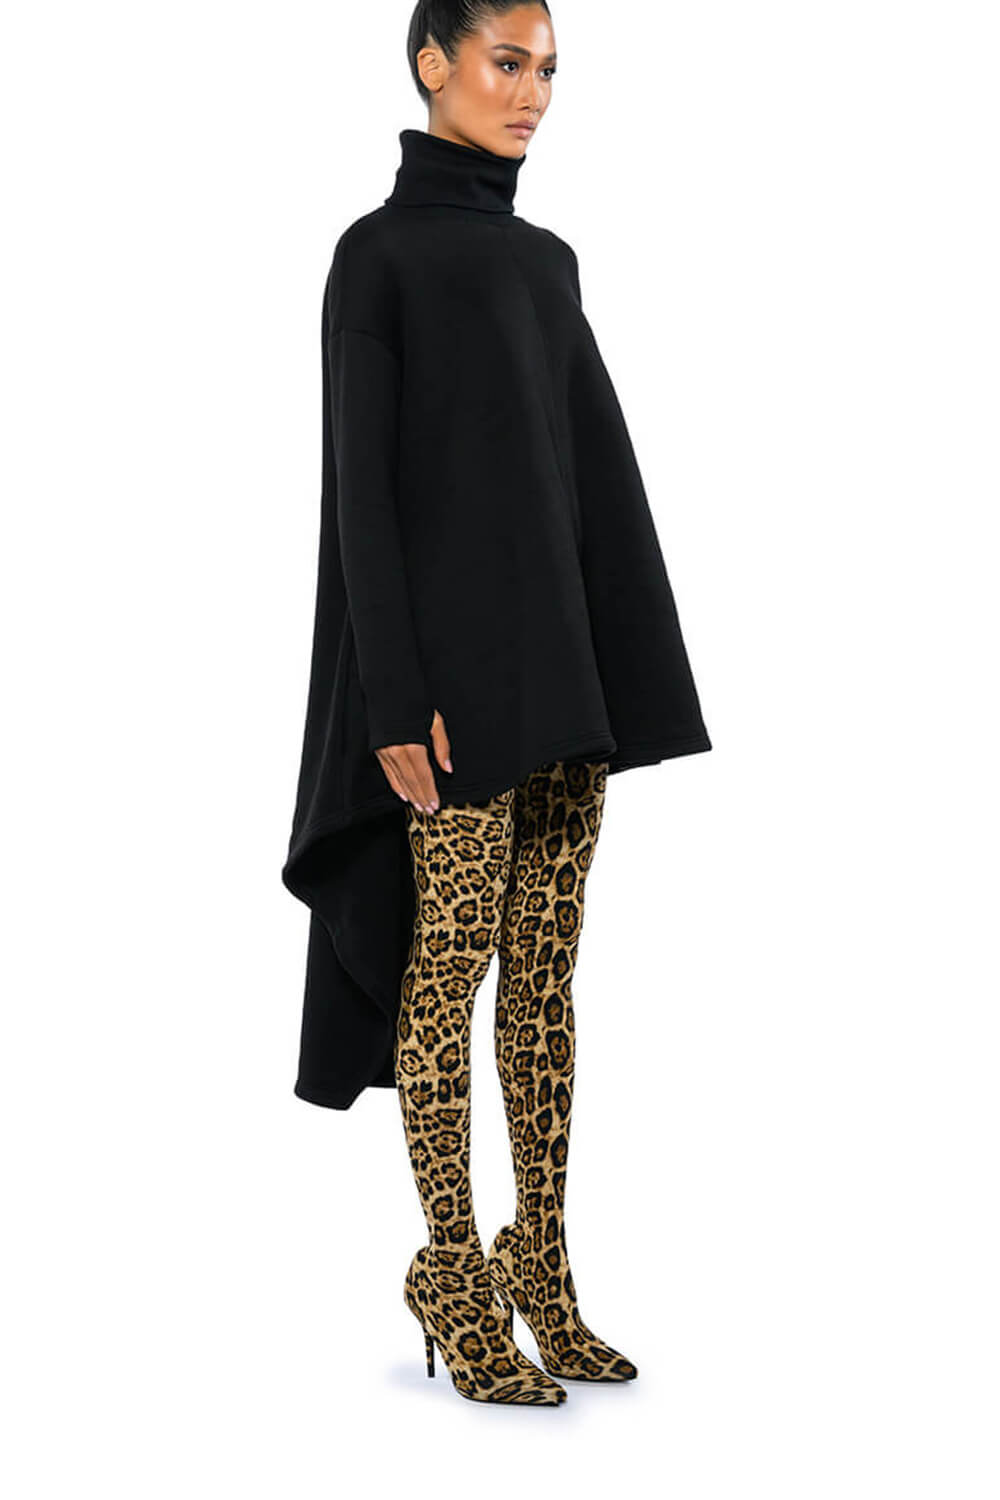 Leopard Print Faux Leather High-Waisted Pointed Toe Stiletto Heel Long Pant Boot